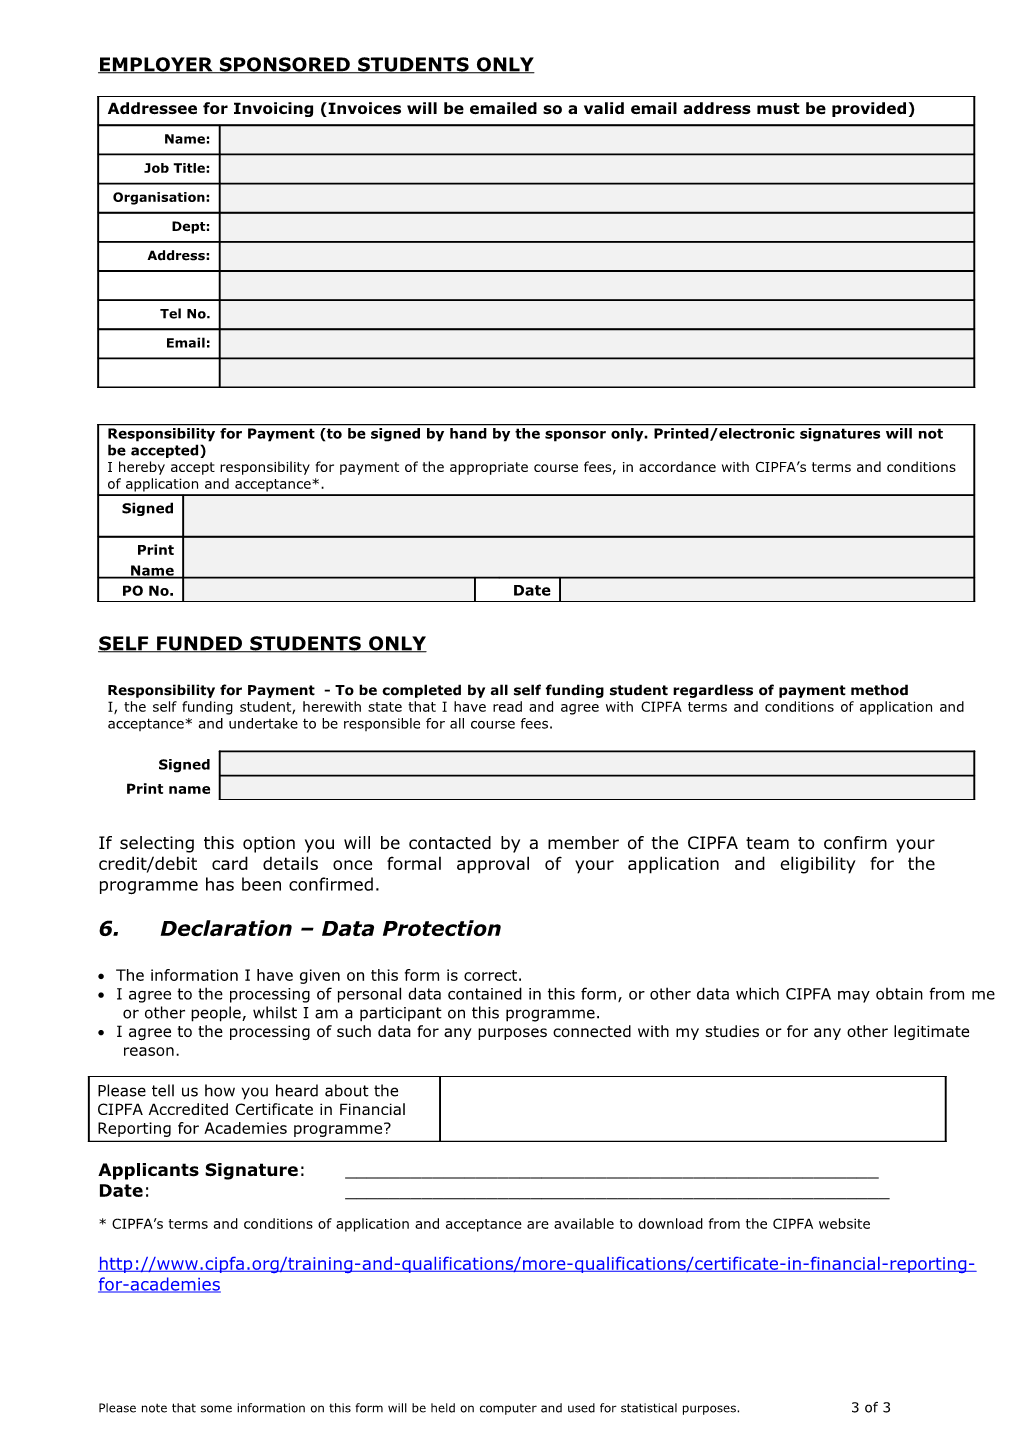 CIPFA Certificate in Financial Reporting for Academies Application Form